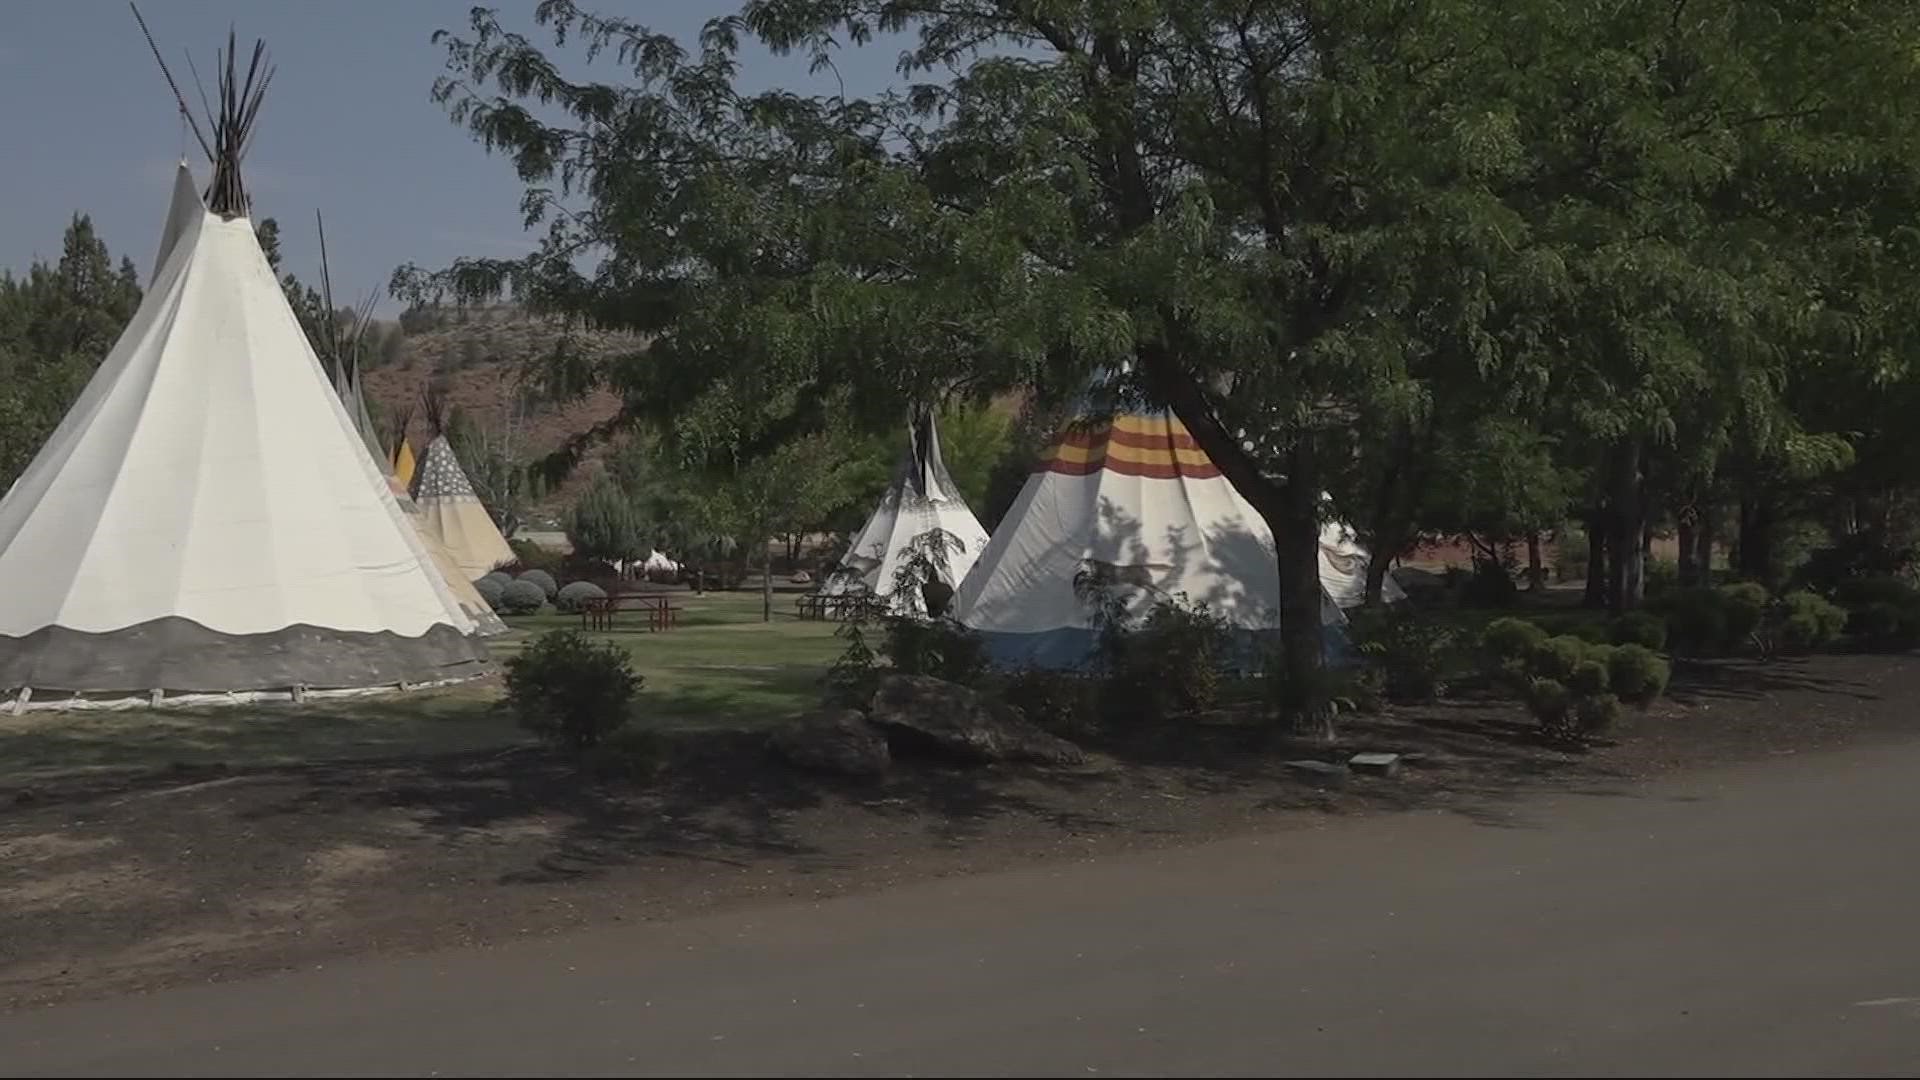 The resort also plans to expand its hot spring swimming pools and lodging areas, which include rentable teepees.